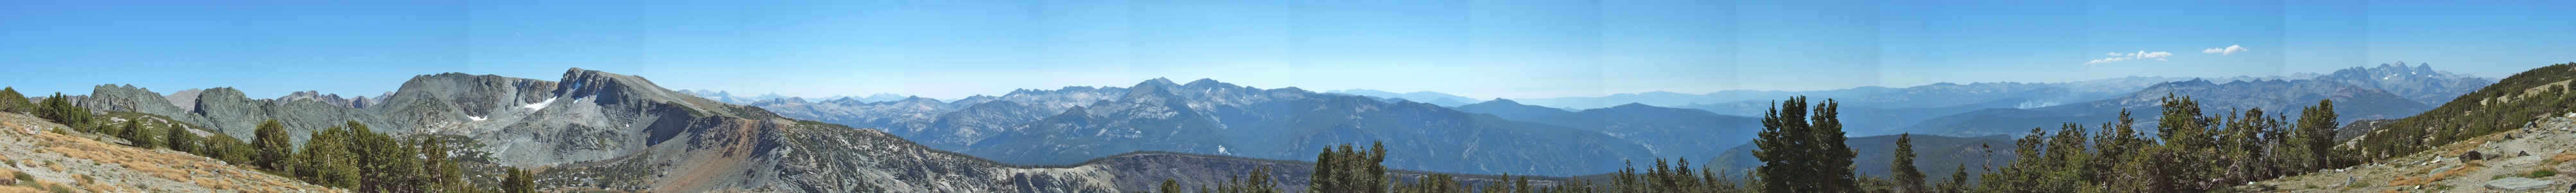 Mammoth Crest panorama south - 9/2010